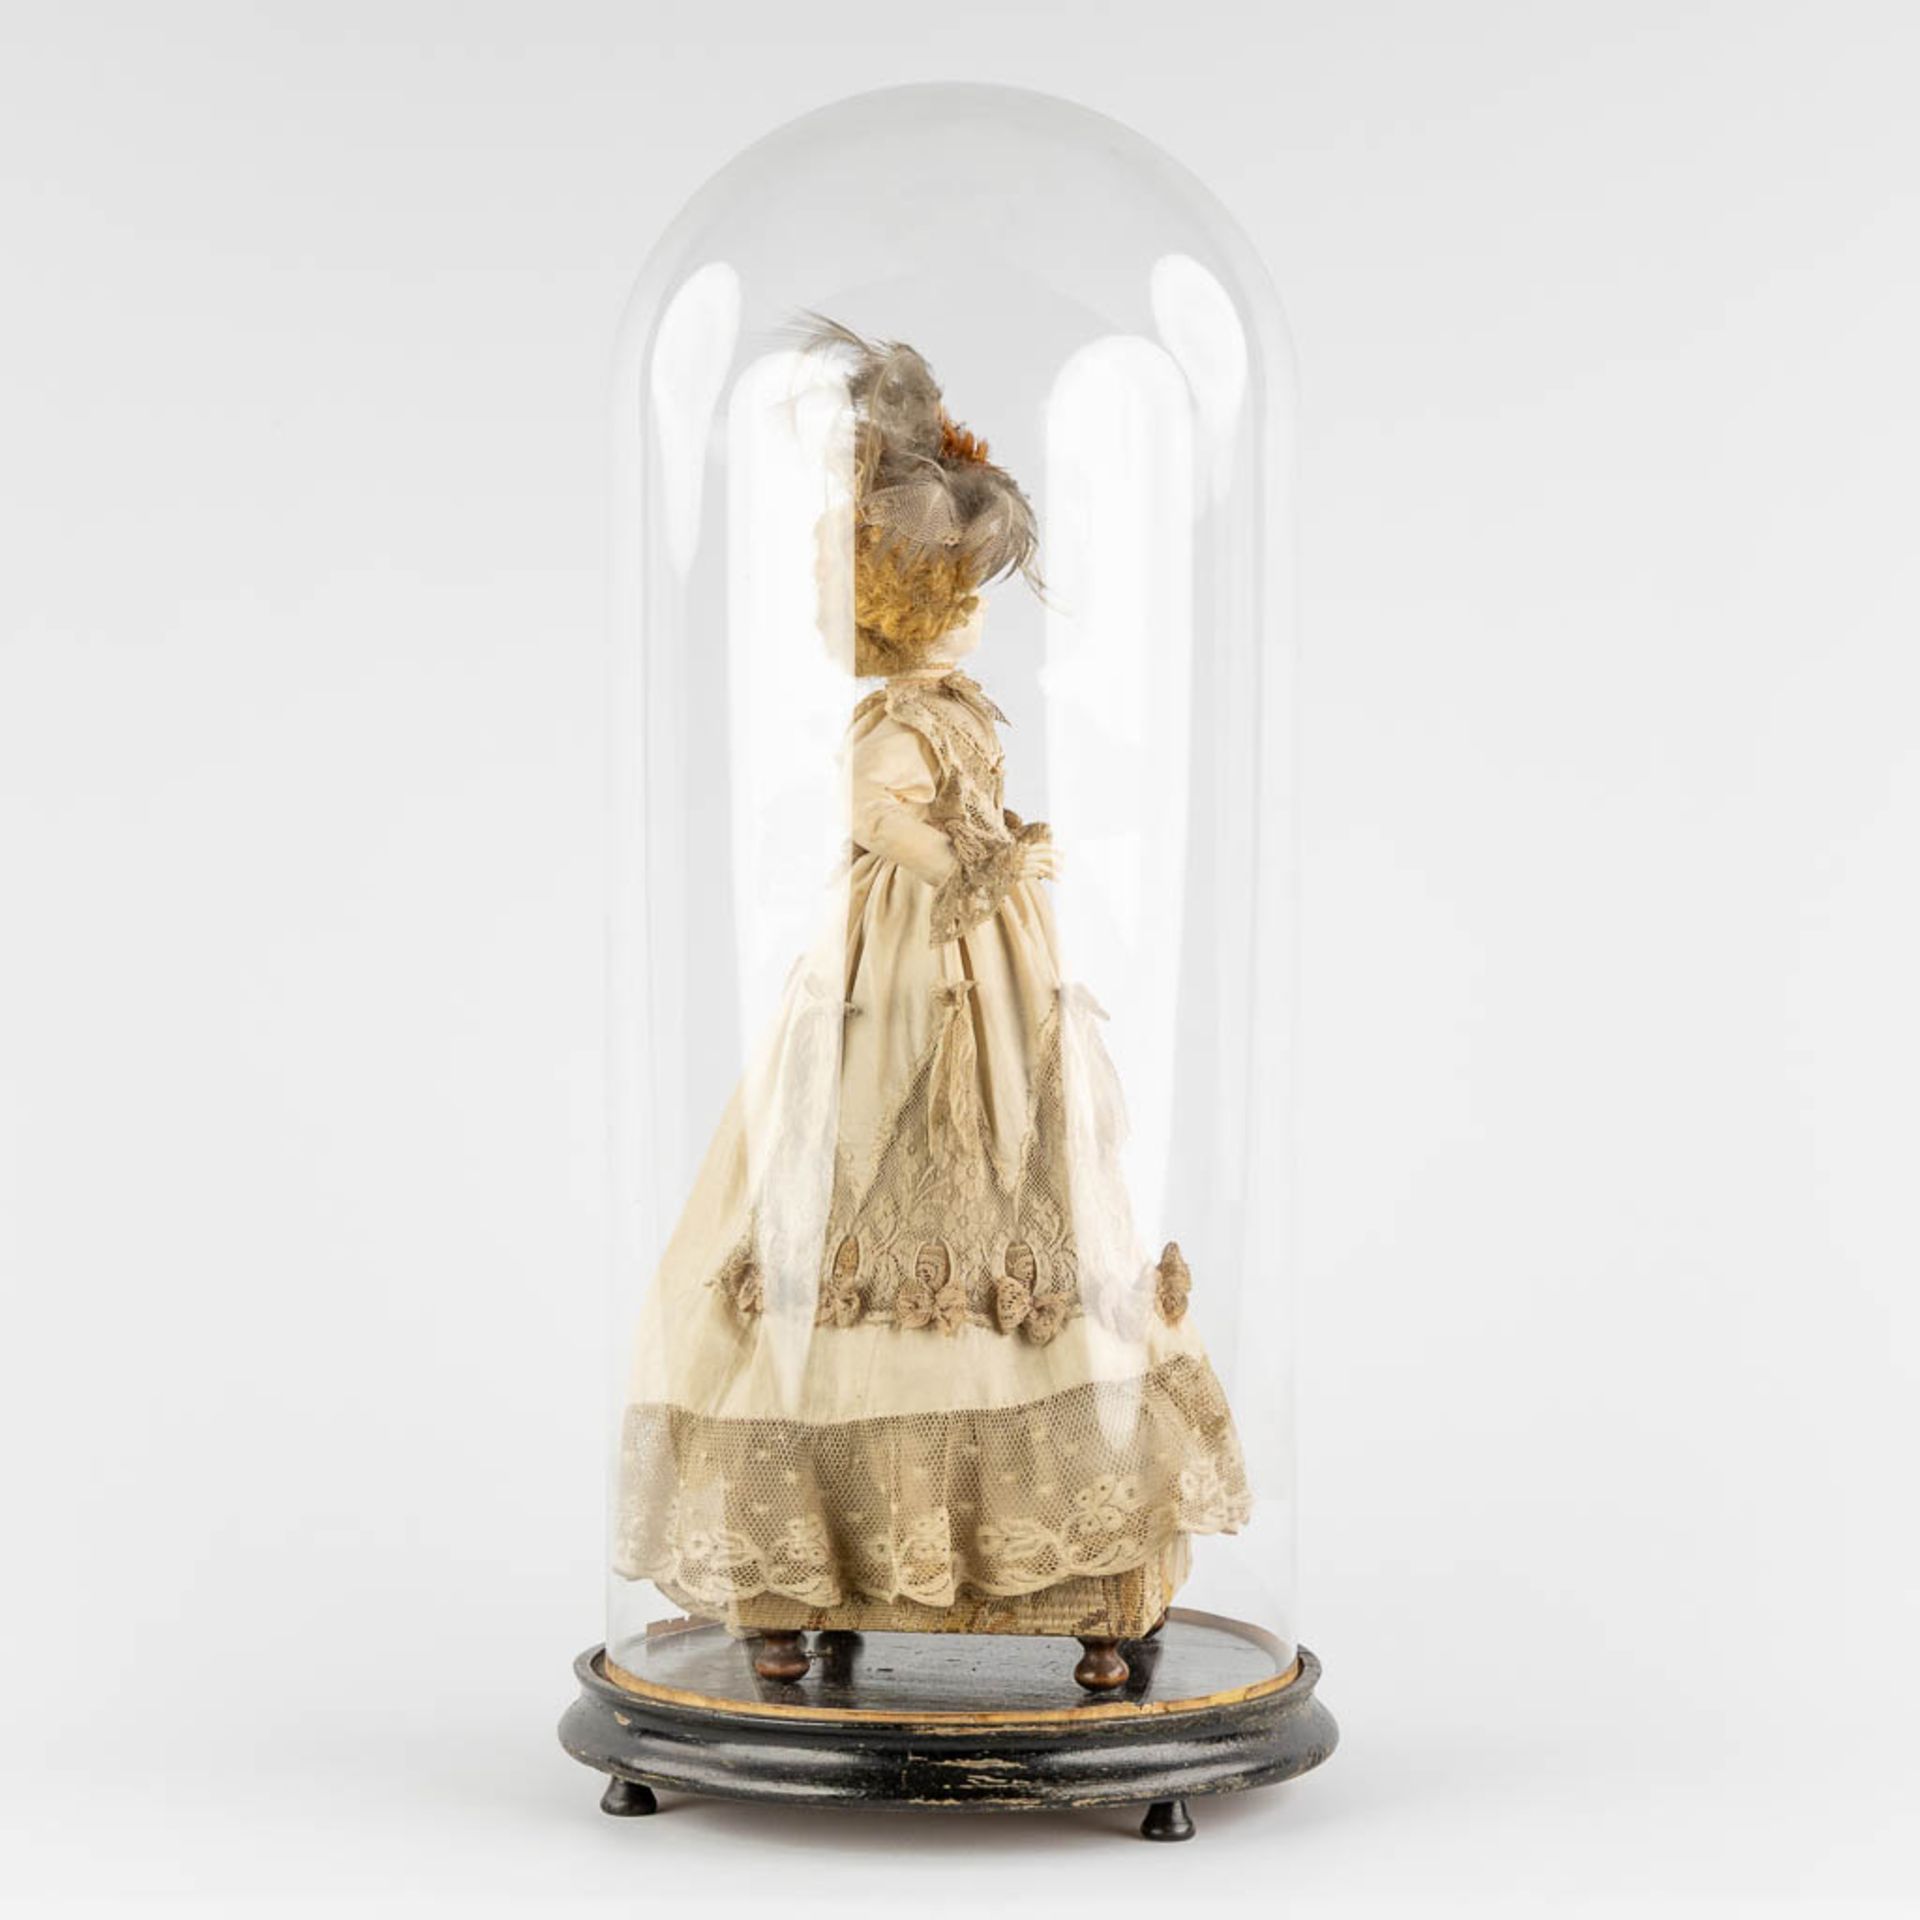 An antique 'Automata', in lace dressed doll with a music box. Under a glass dome, Circa 1920. (H:48 - Image 3 of 13